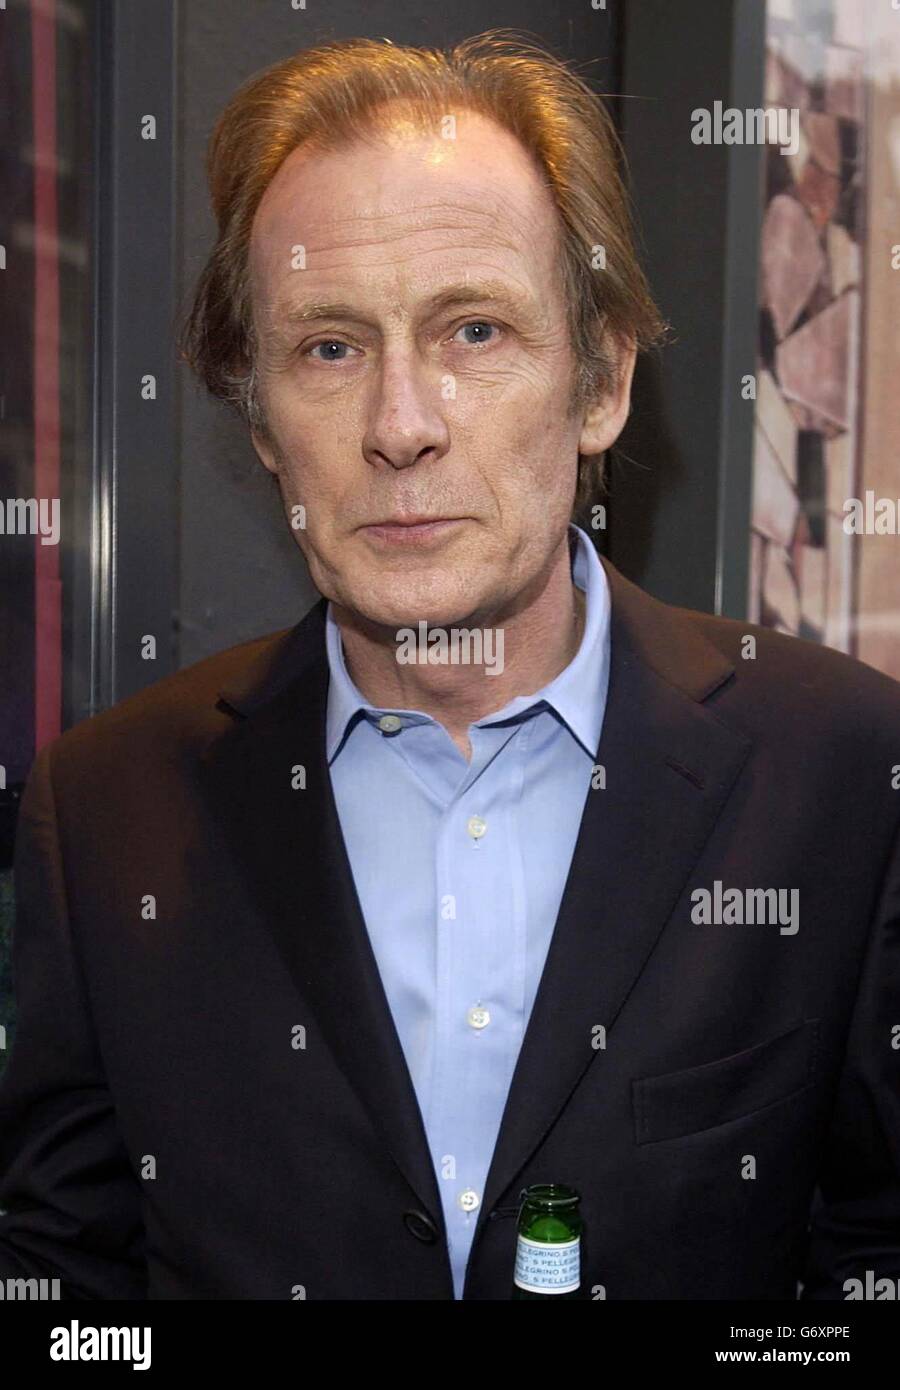 Actor Bill Nighy arrives for the UK premiere of I'll Sleep When I'm Dead at Screen On The Green in Islington, north London. Stock Photo